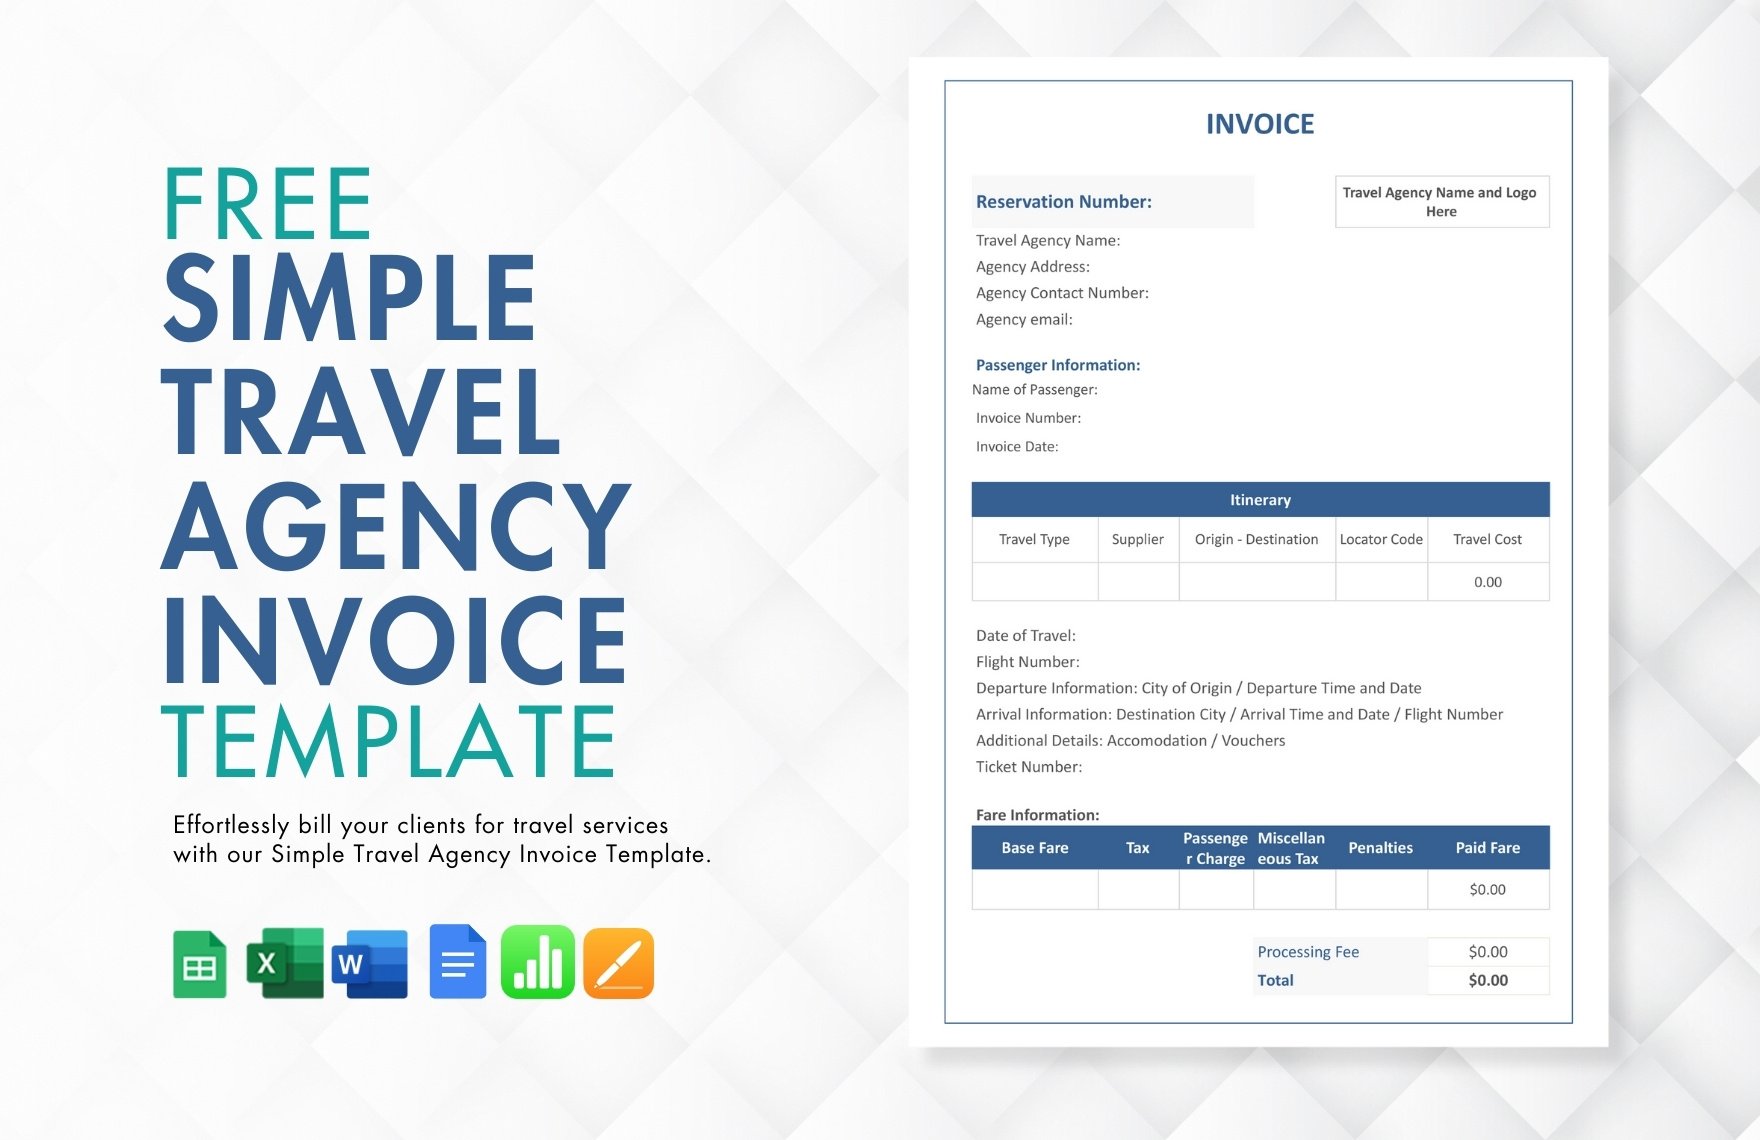 Free Simple Travel Agency Invoice Template